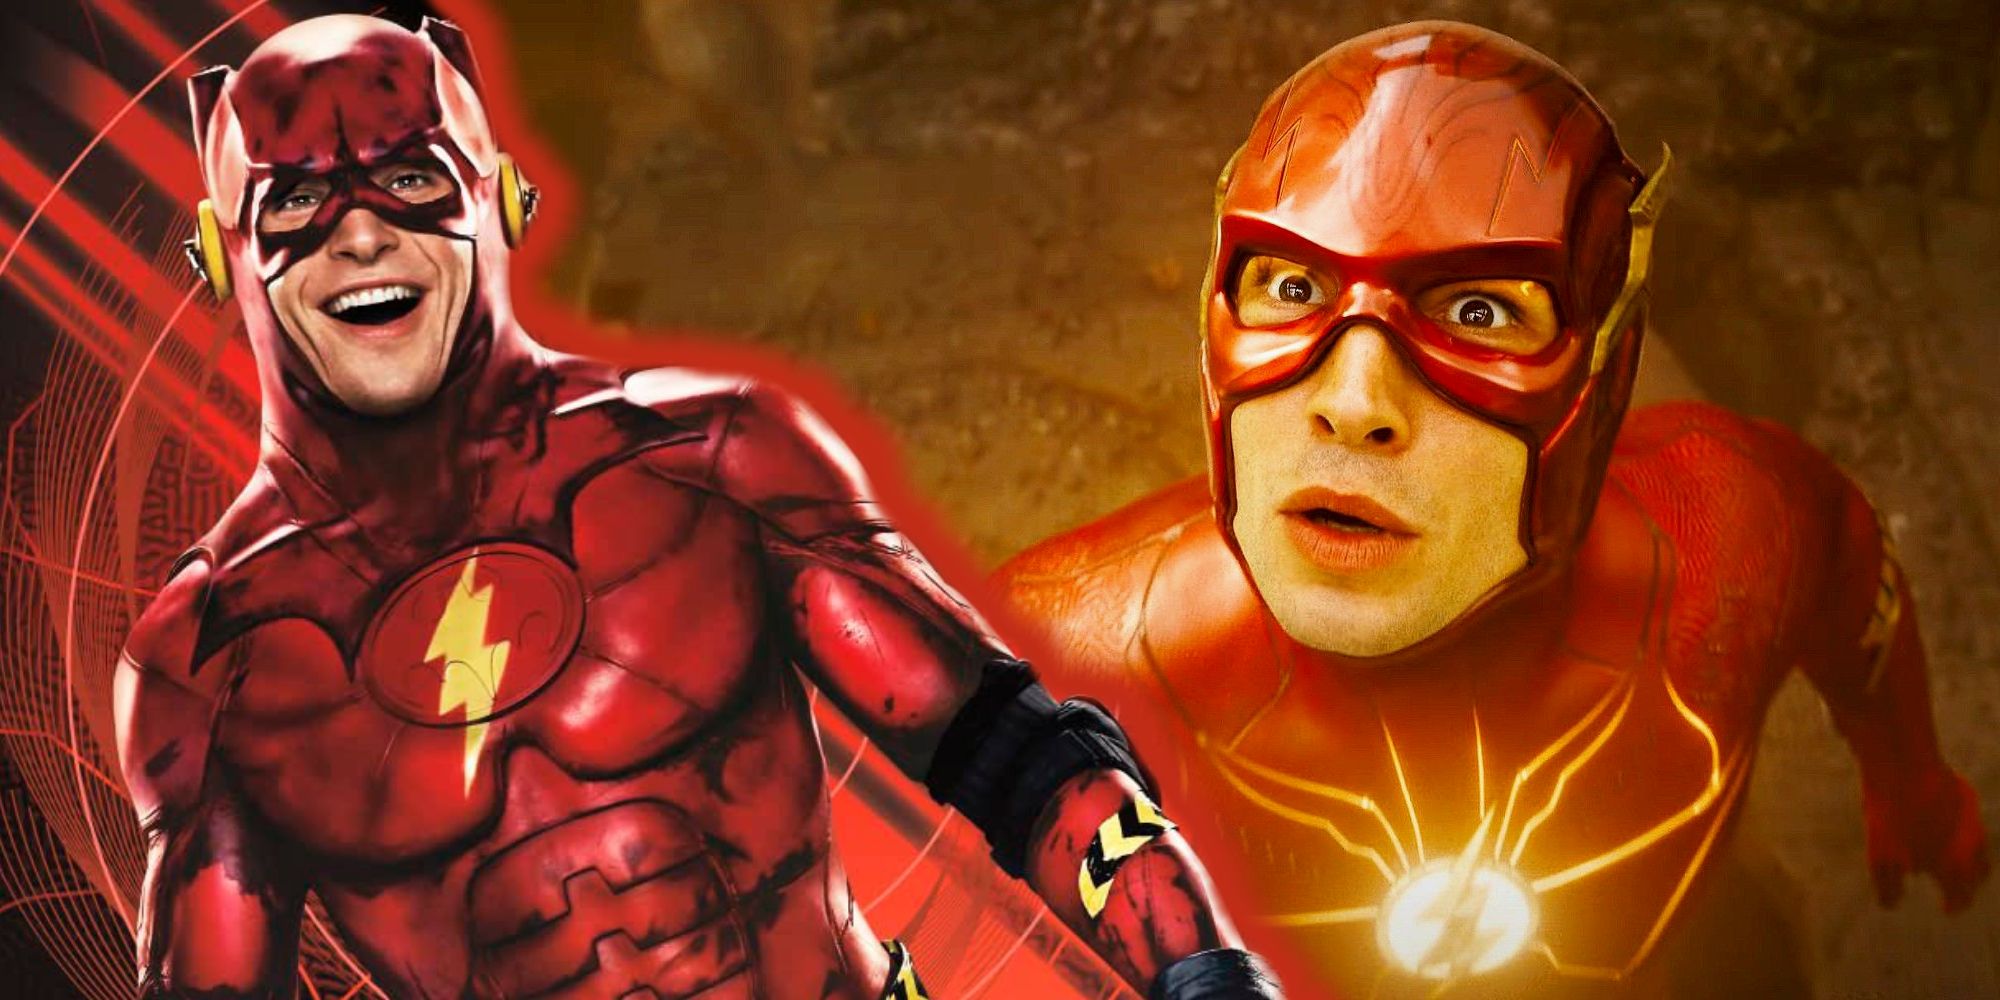 Ezra Miller as Barry Allen and the Other Barry in his modified Batman suit for The Flash.